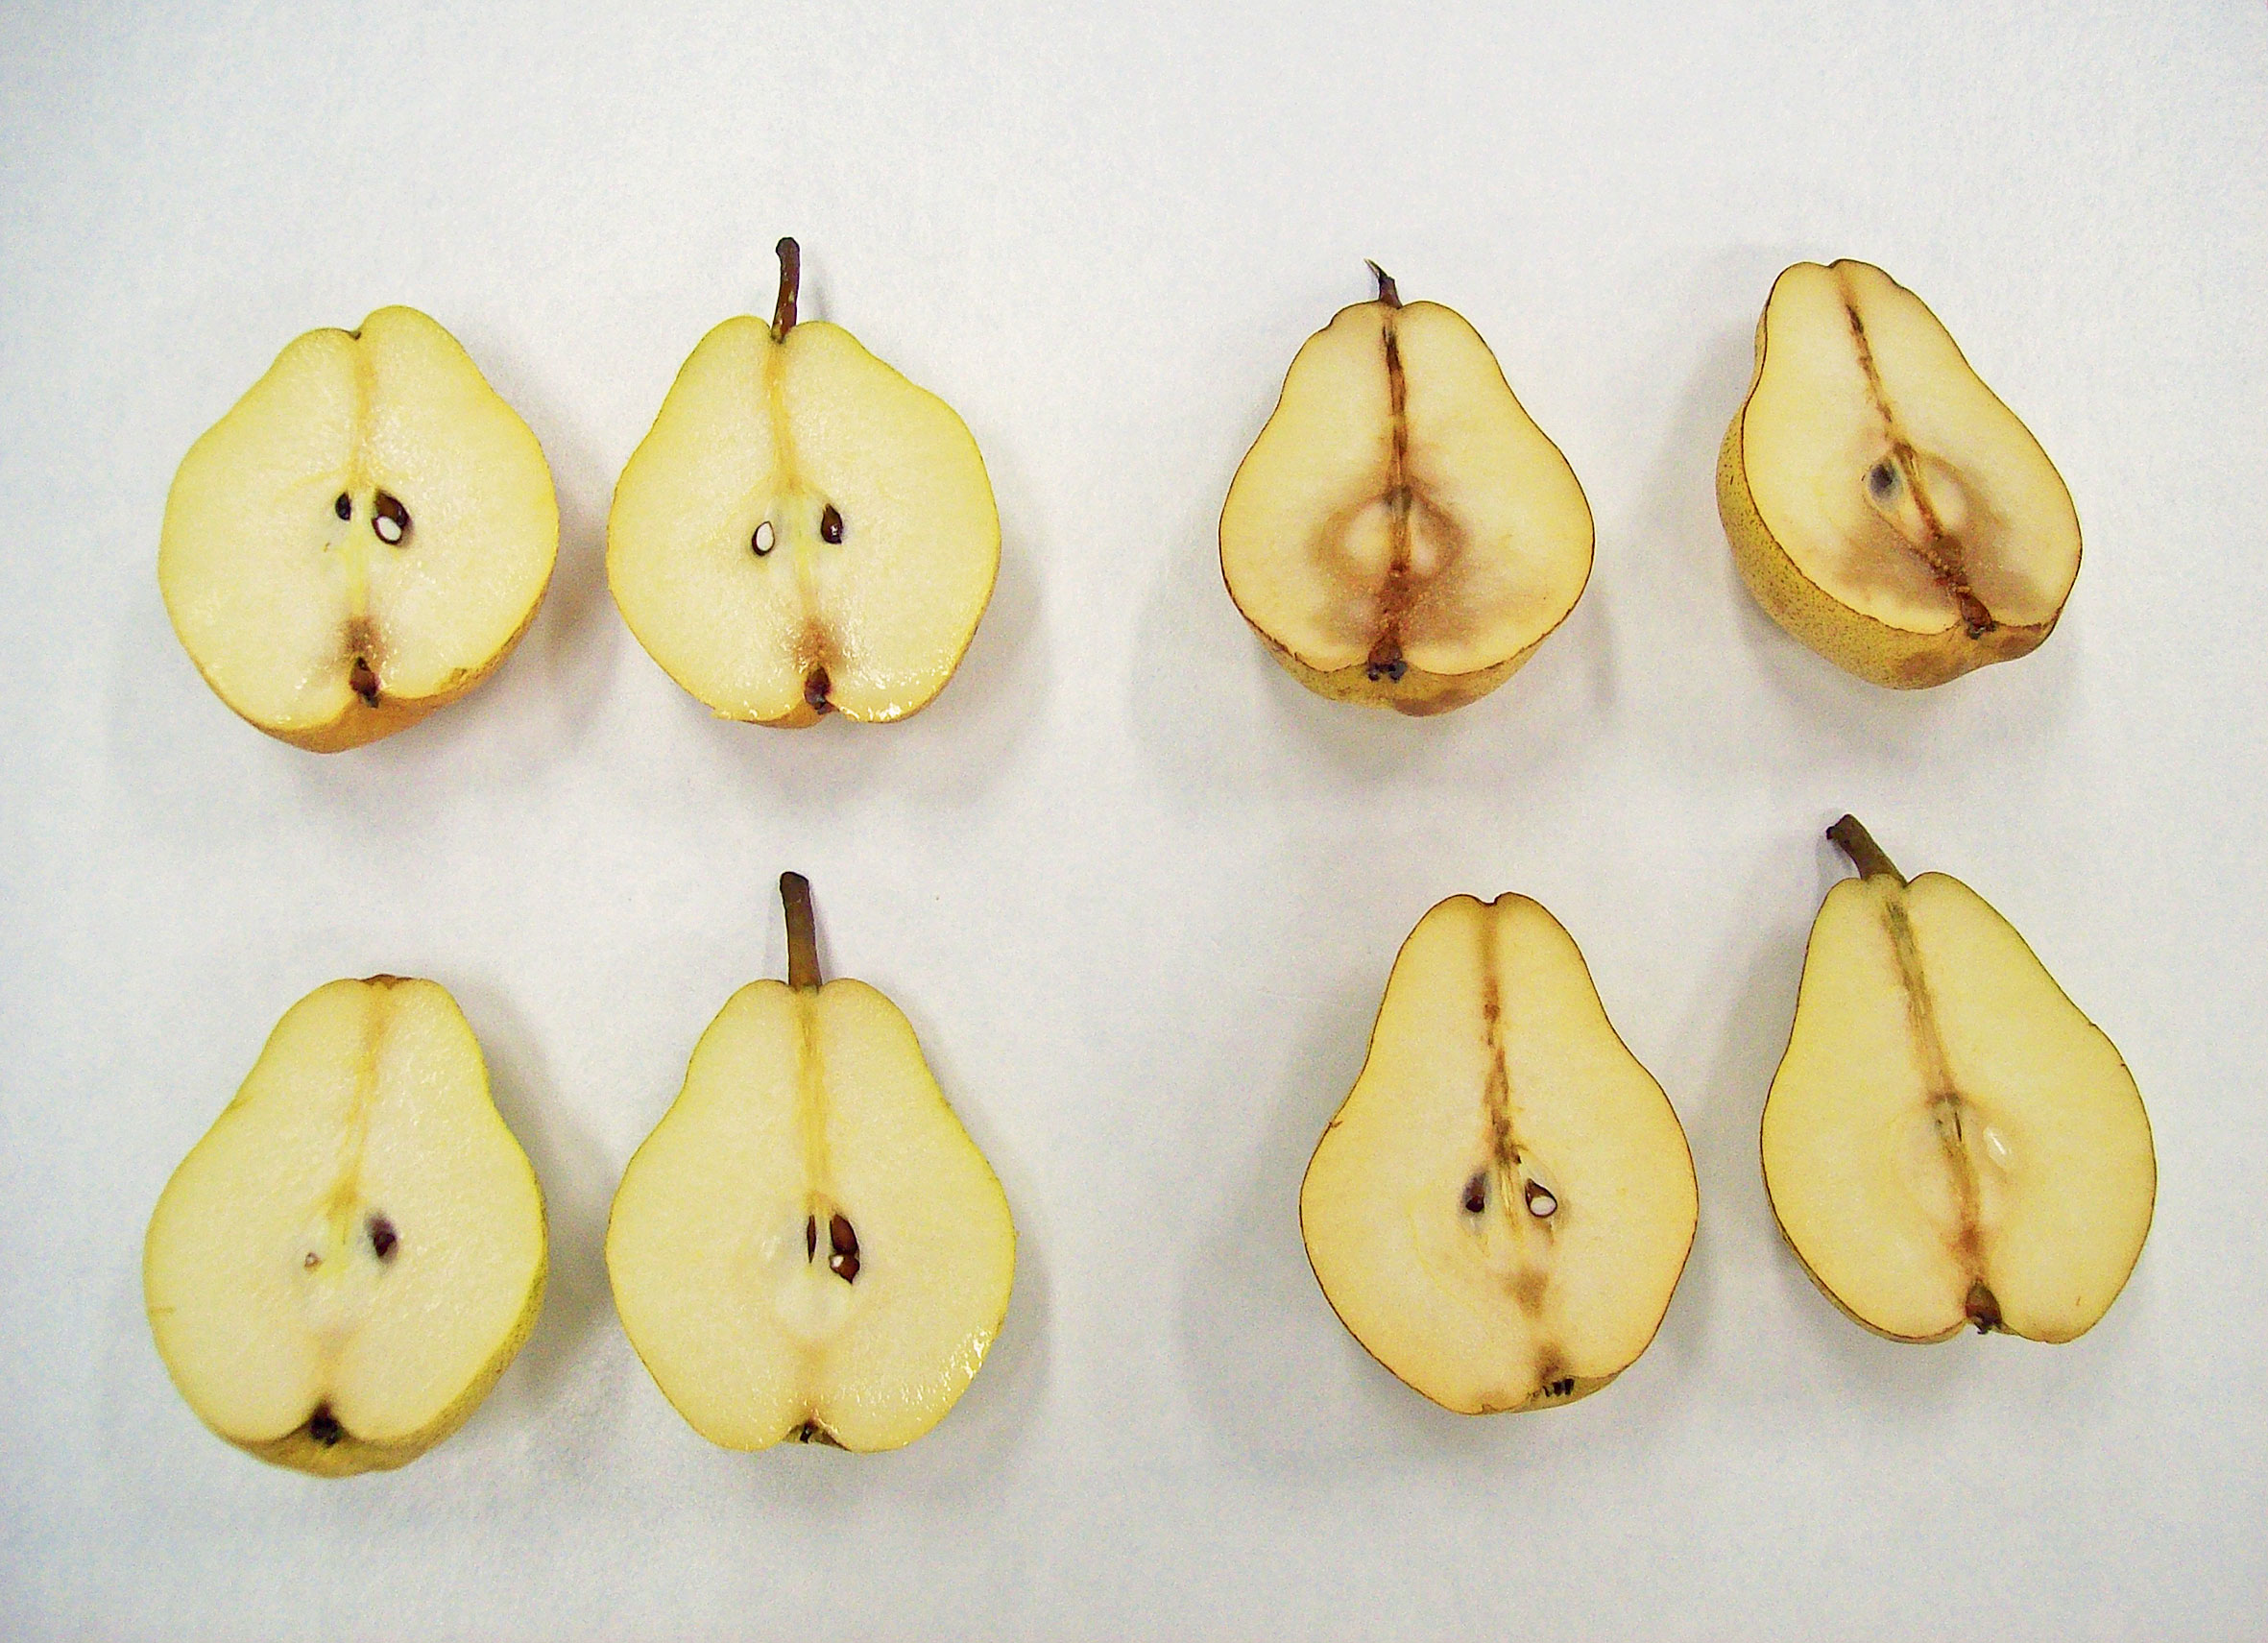 Effect of the 1-MCP treatment on the evolution of pears quality during storage and shelf life